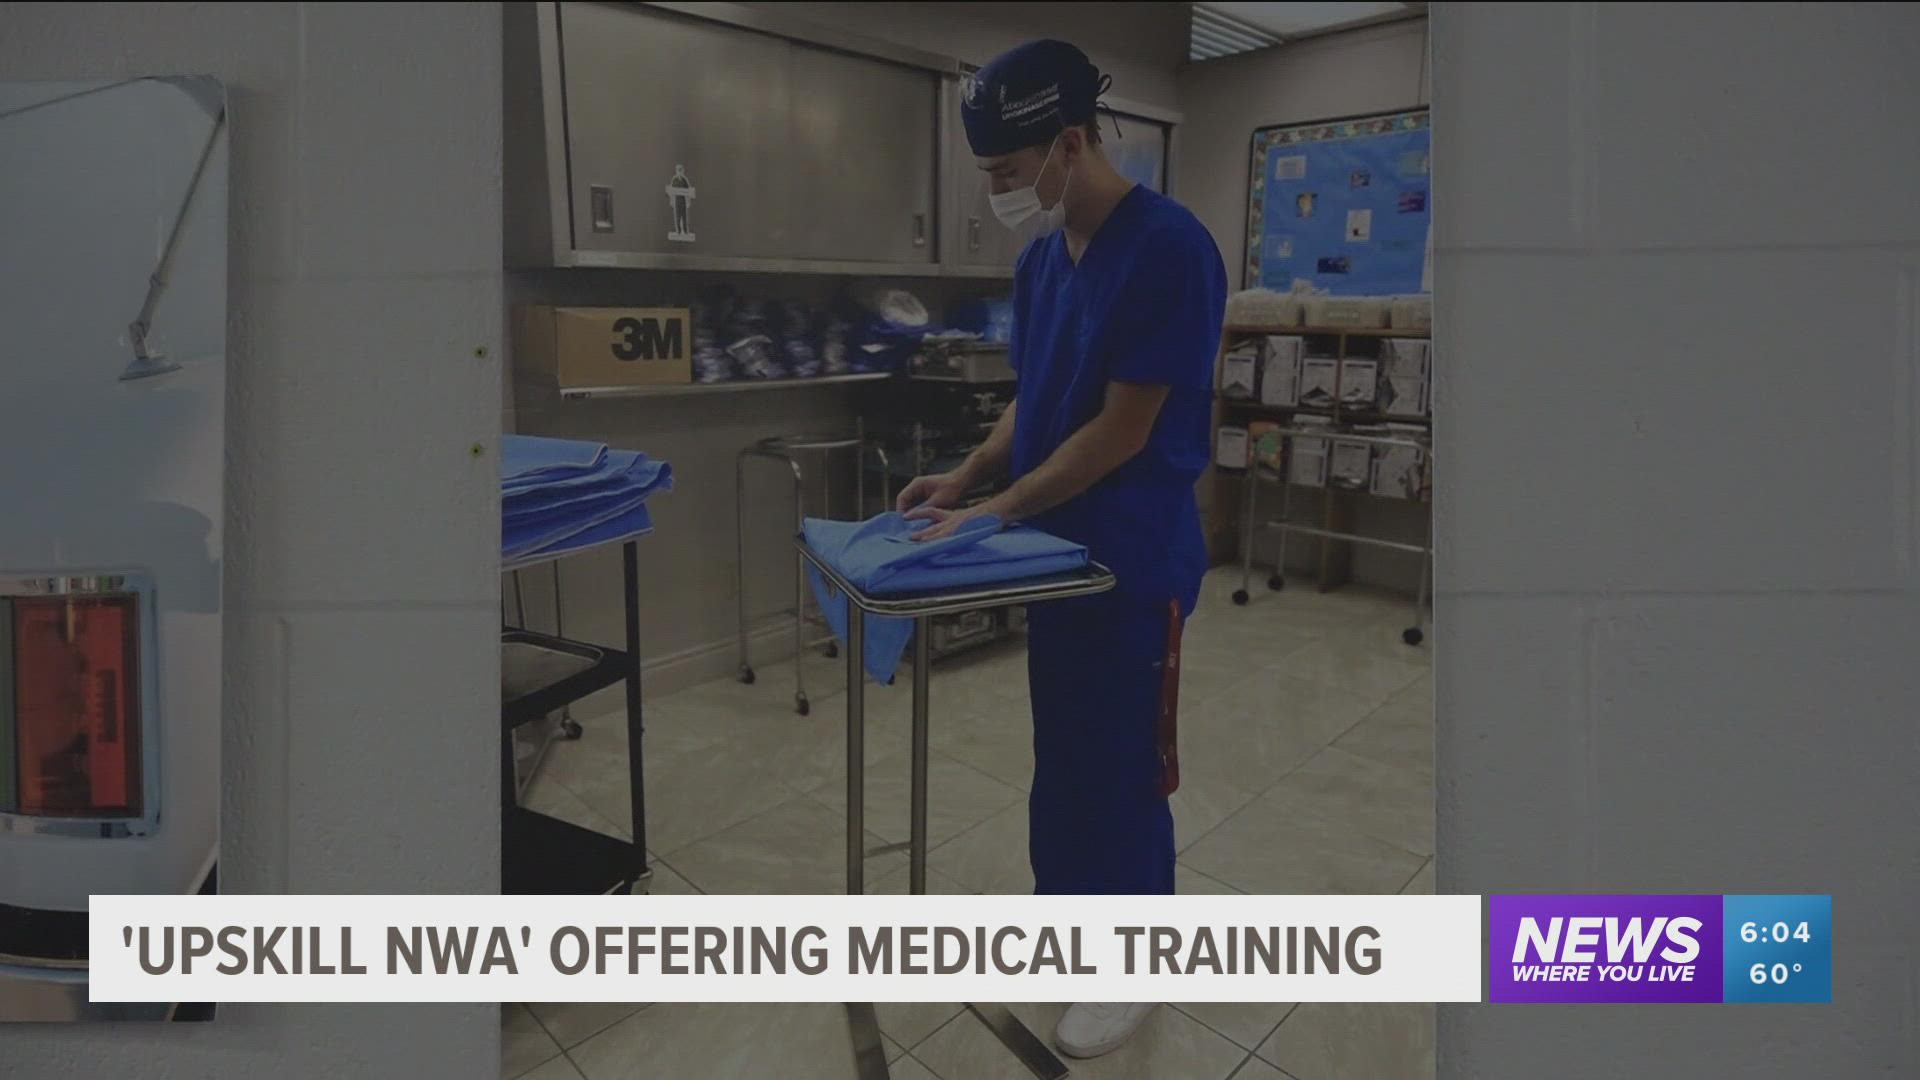 The Springdale City Council approved $3 million of American Rescue Plan funds to help with medical training through the Upskill NWA program.